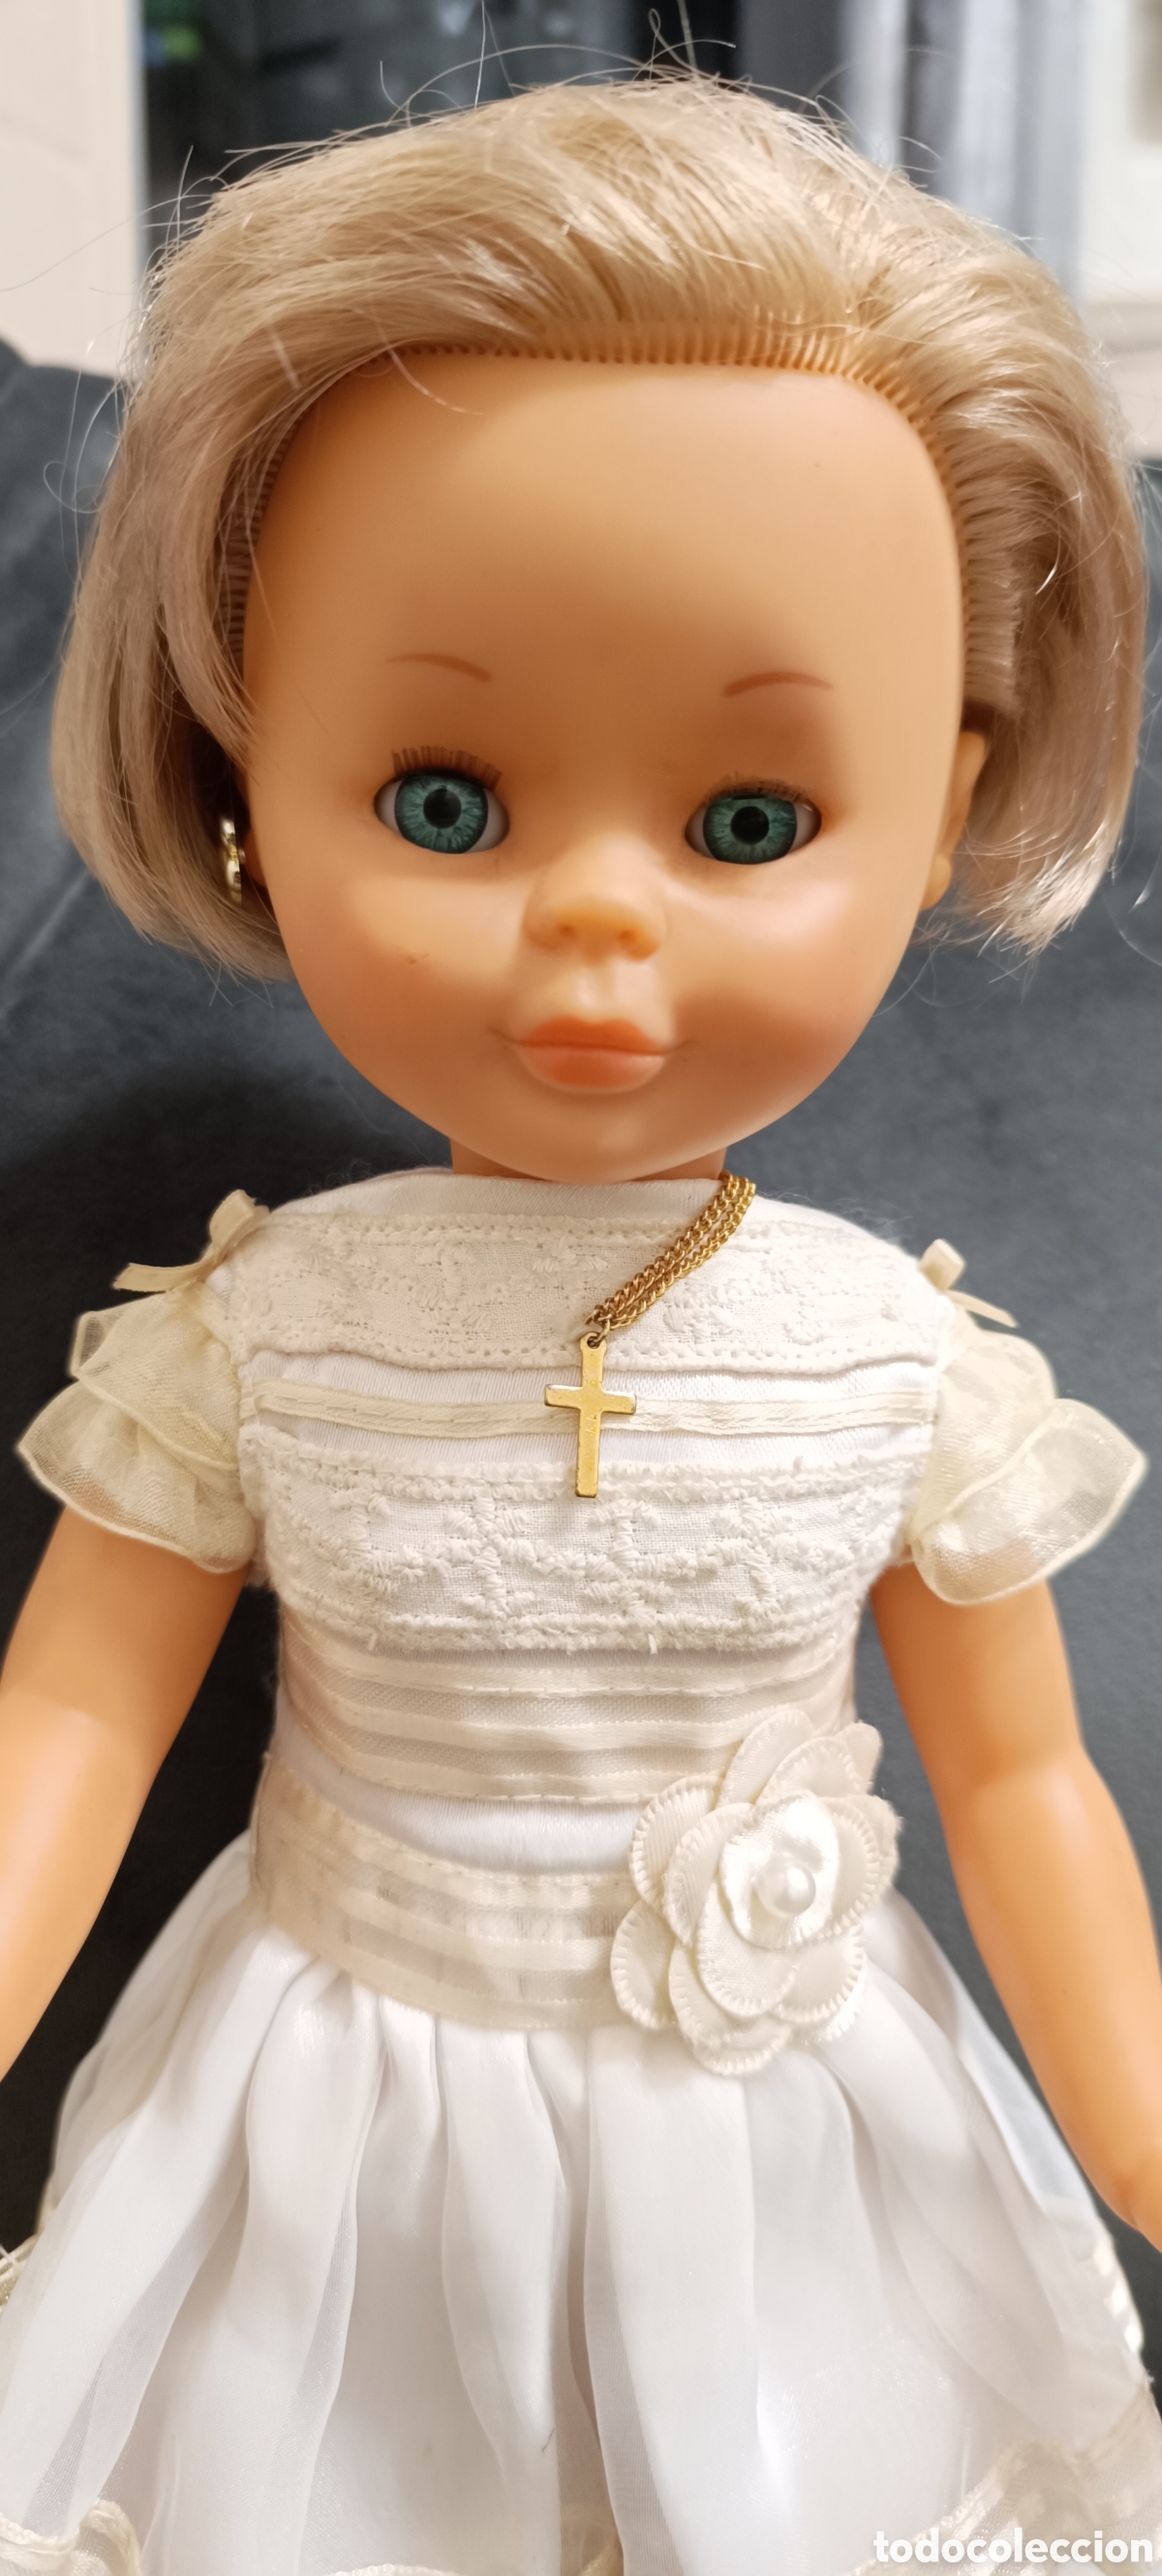 lote ropa nancy new de famosa - Buy Nancy and Lucas dolls on todocoleccion